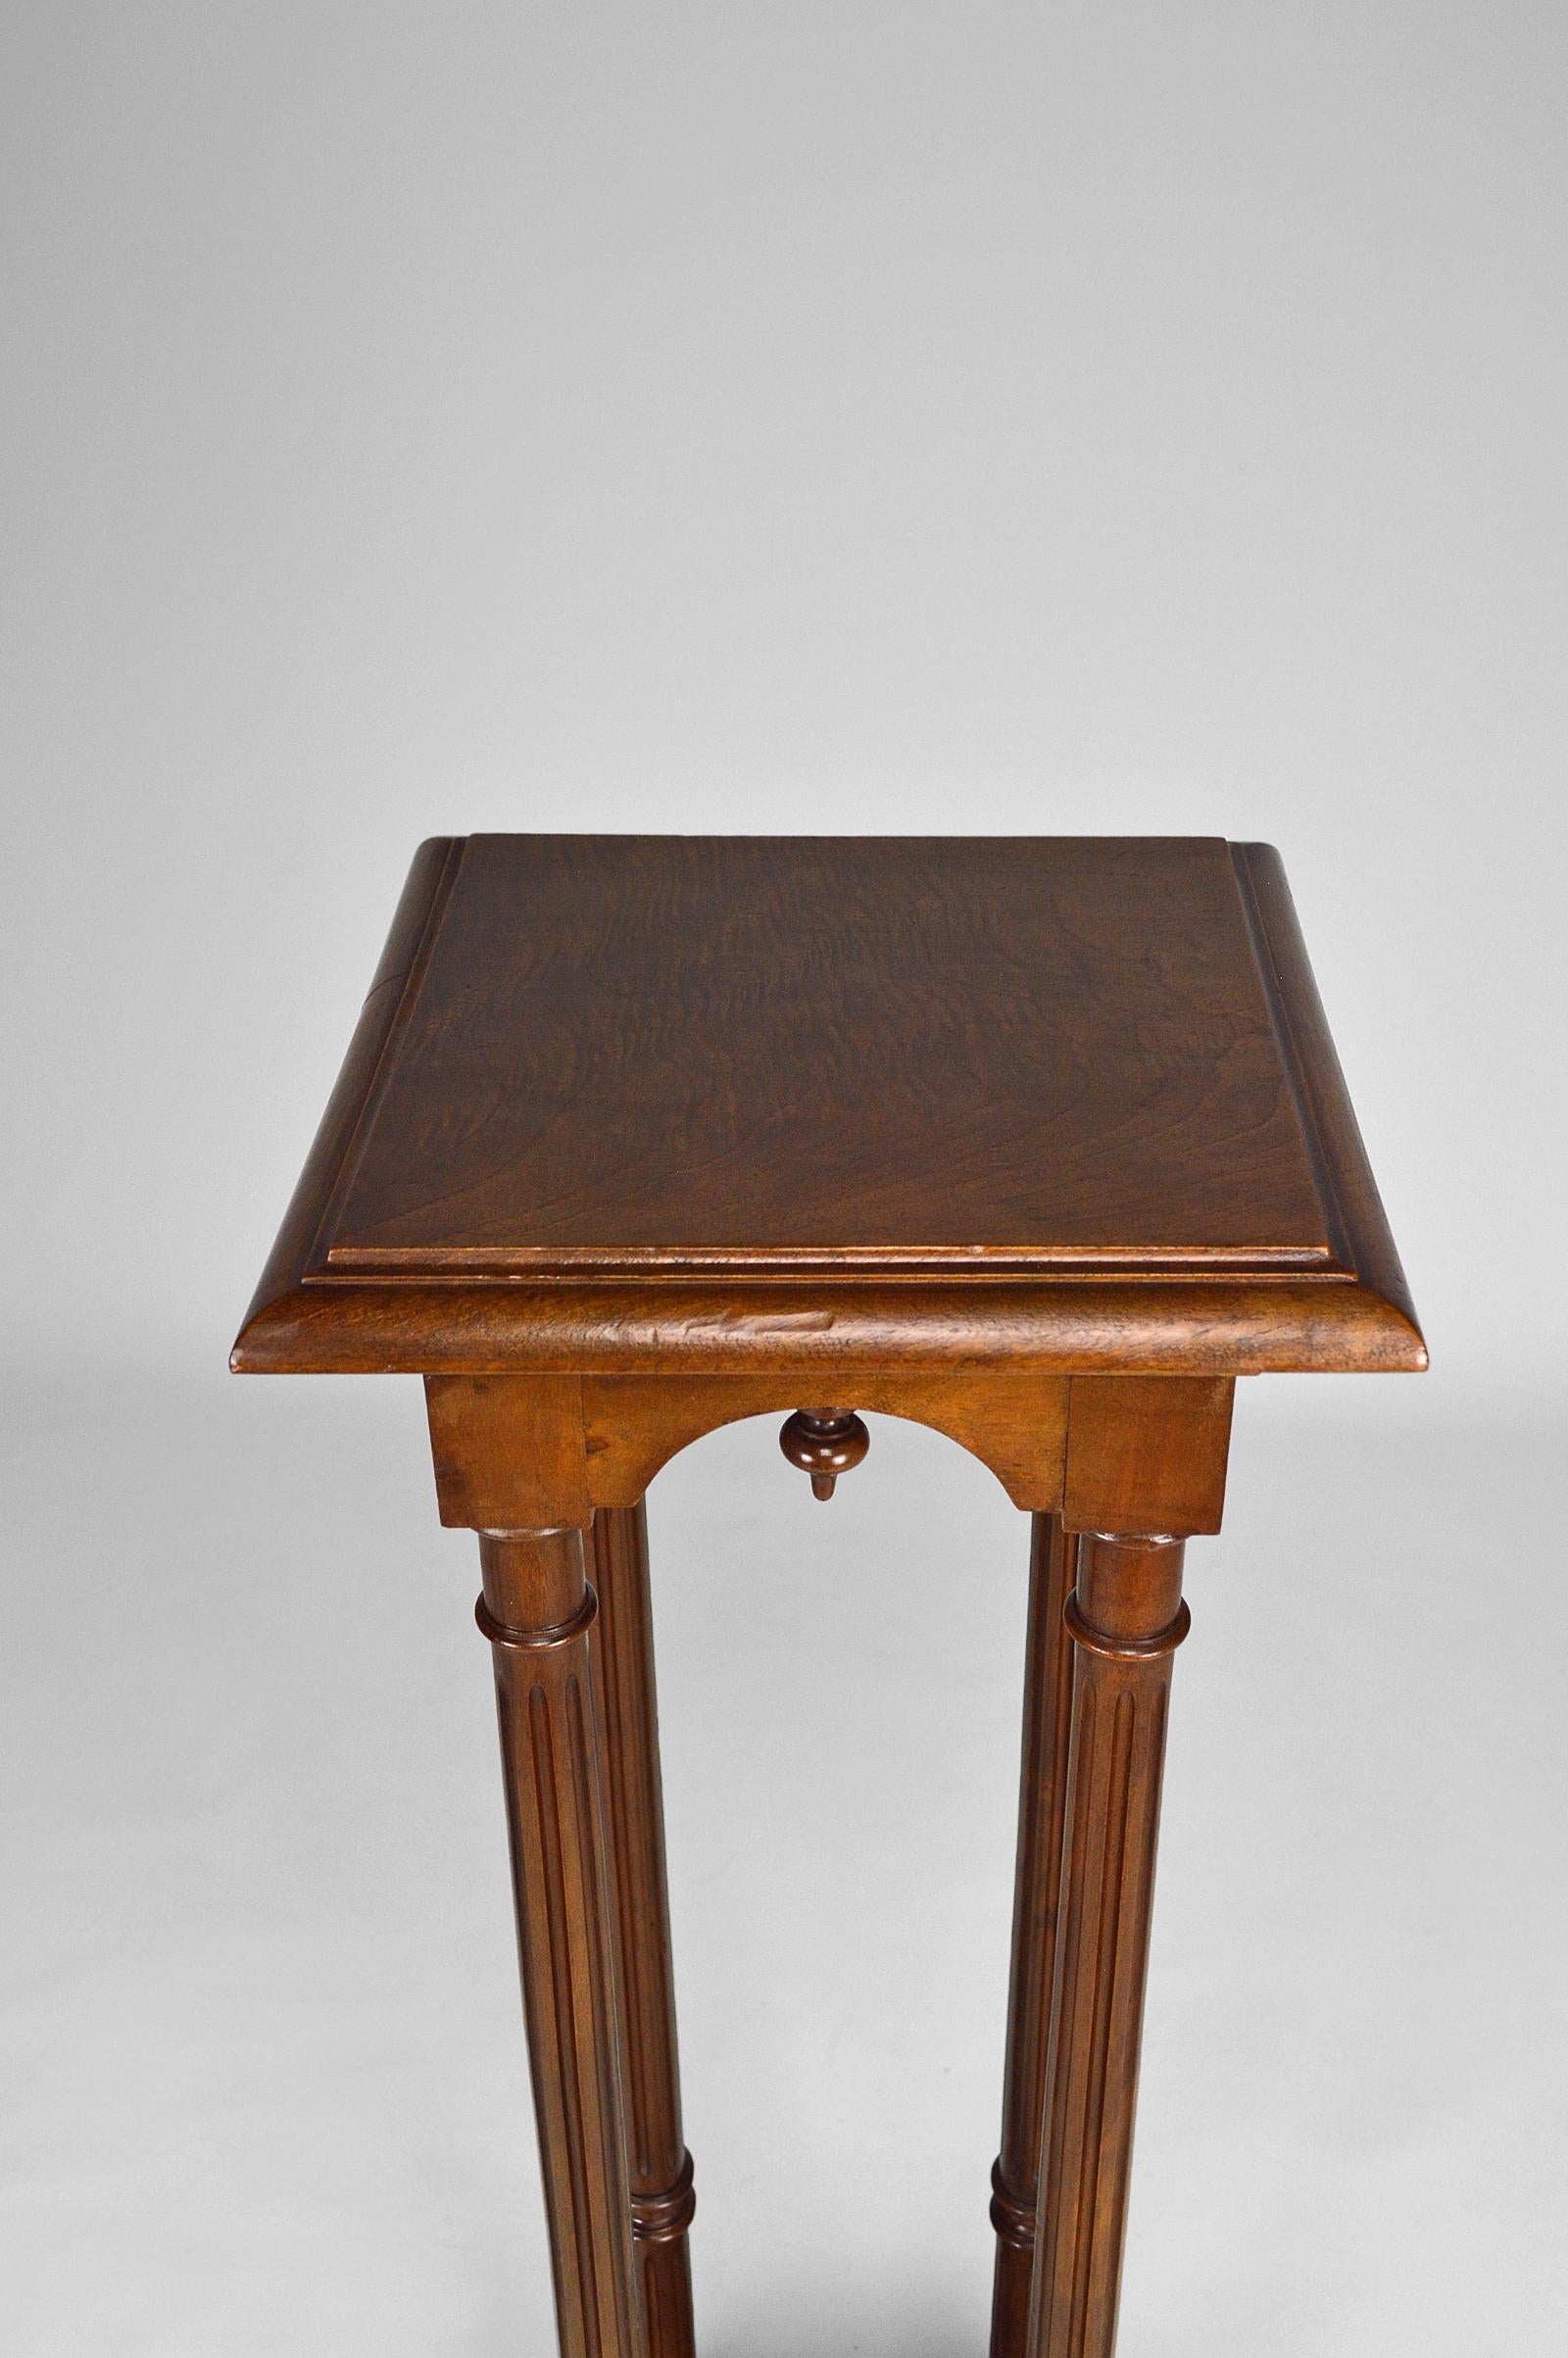 Gothic Revival Pedestal Stand in Walnut, France, circa 1880 For Sale 1